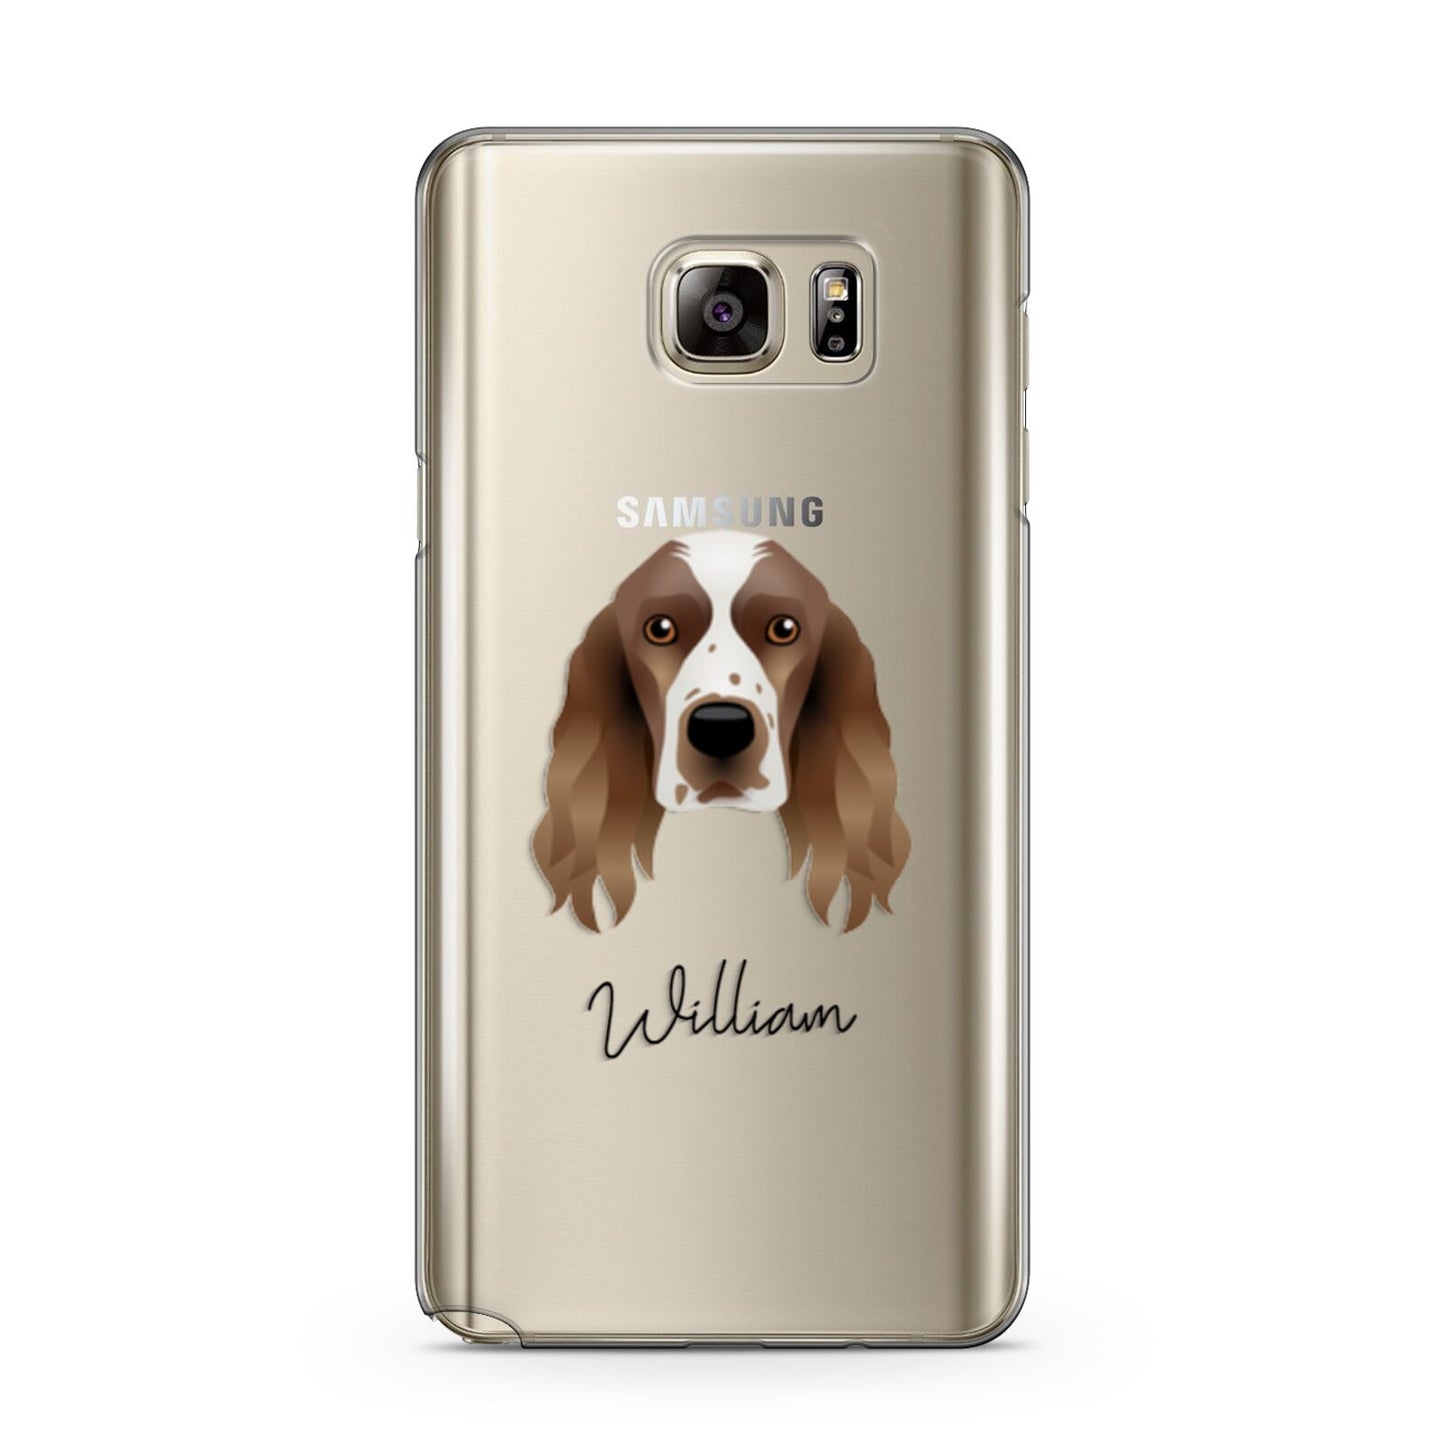 Welsh Springer Spaniel Personalised Samsung Galaxy Note 5 Case